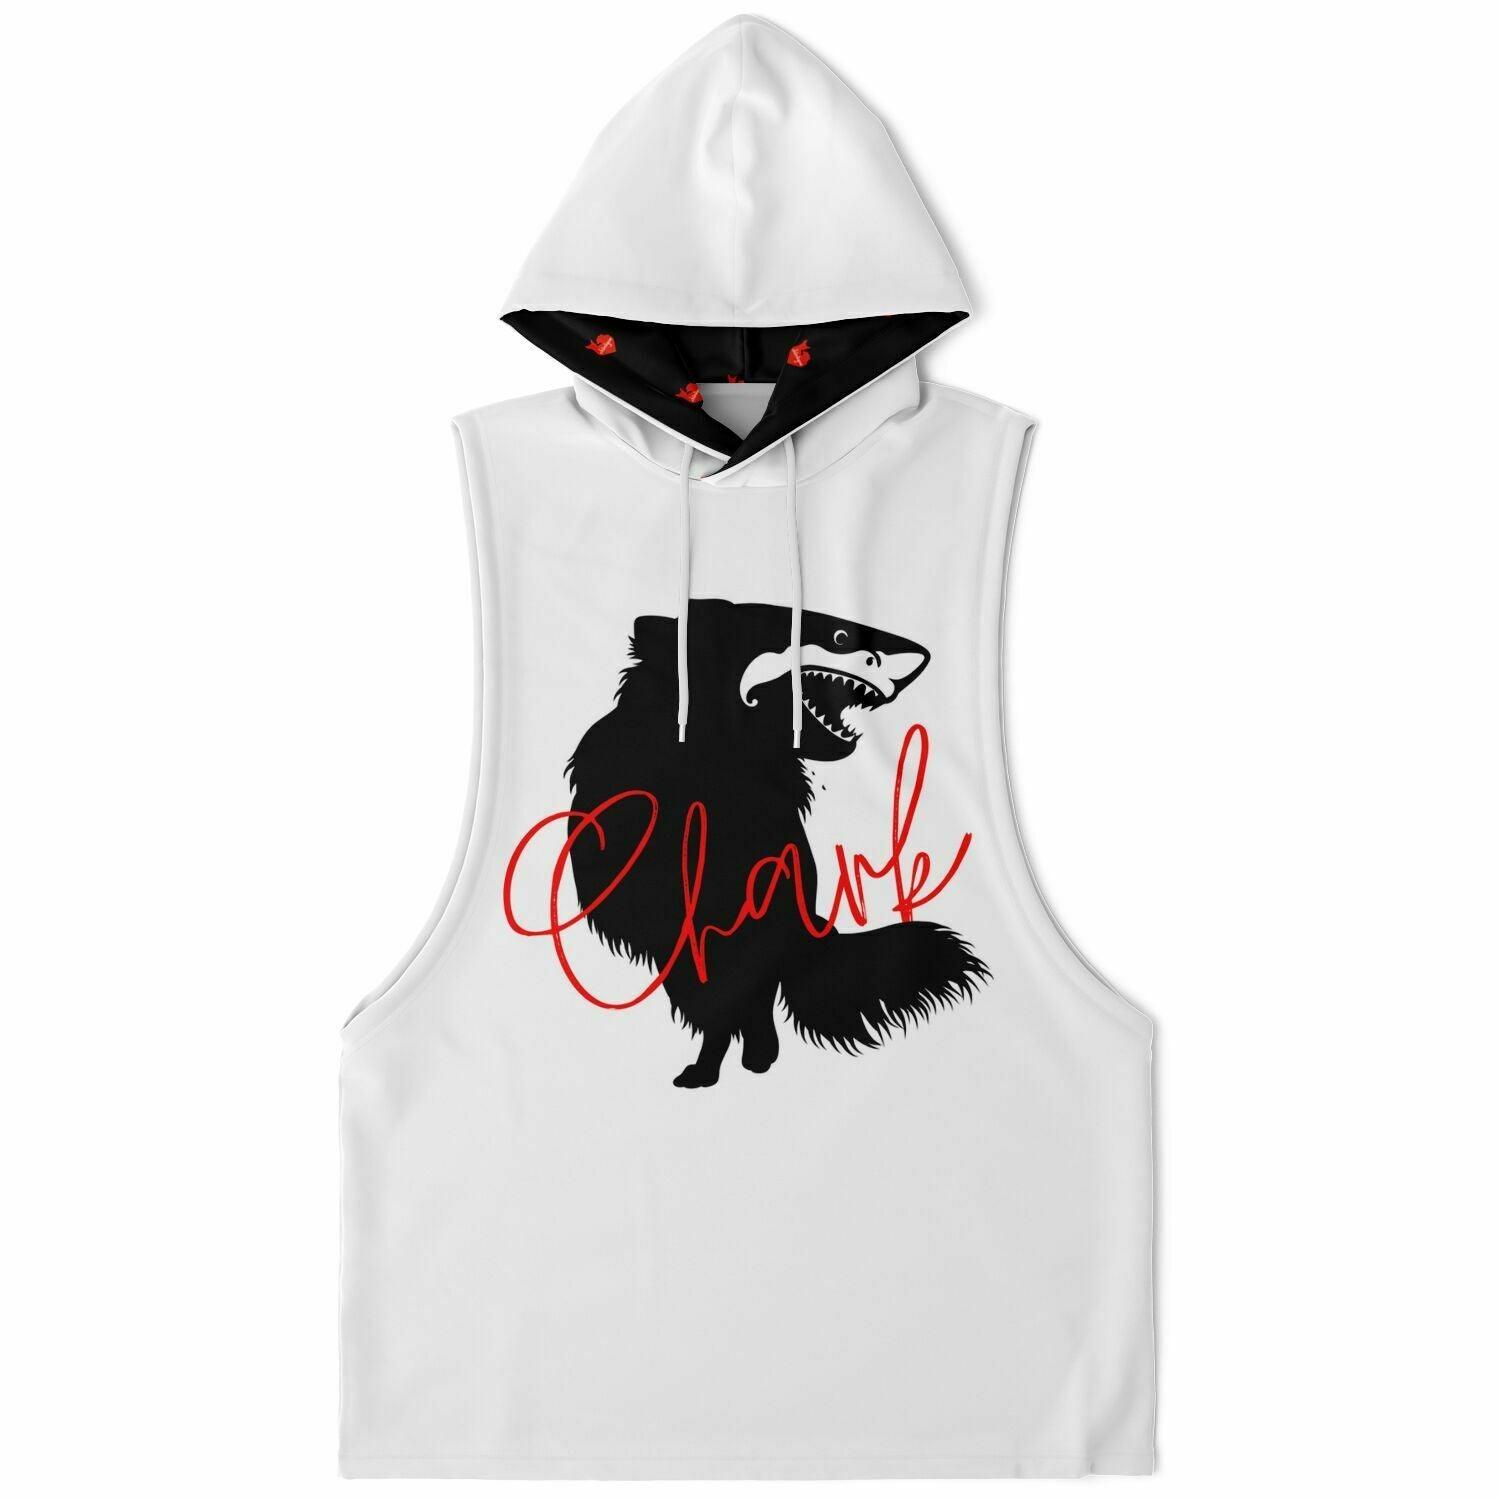 Chark punky white sleeveless hoodie. Front: black chihuahua with the face of a great white shark - mouth open to show off jaws lined with sharp white teeth, with "Chark" in red cursive font. Back: another shark-faced chi and a "dictionary entry" of the noun "chark": a chihuahua with teeth like a shark. Contrasting hoodie inner: Black with red Chimigos logos. So cool! Sporty bodybuilder style drop armholes. 95% recycled polyester. Sizes XS - 4XL. Design by Renate Kriegler for Chimigos.